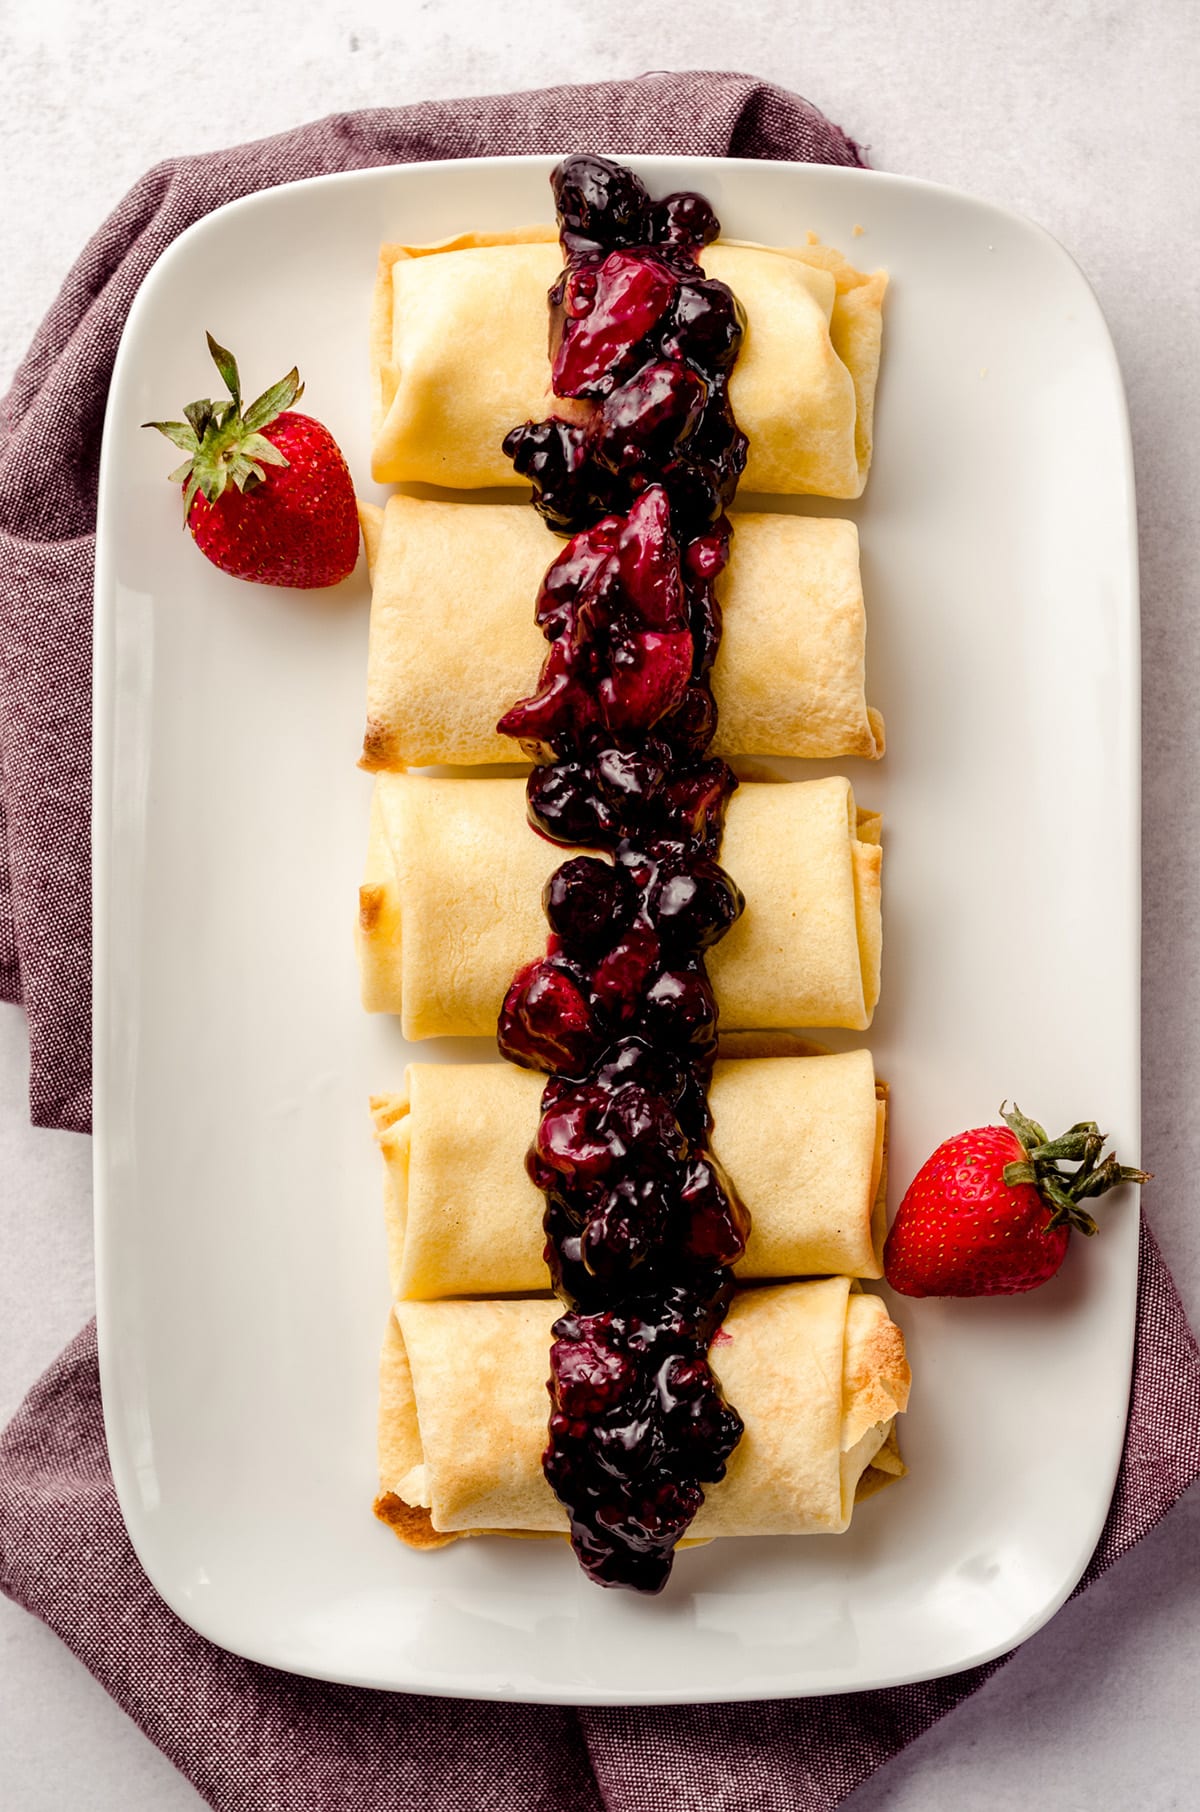 Rolled cheese blintzes topped with a berry compote.